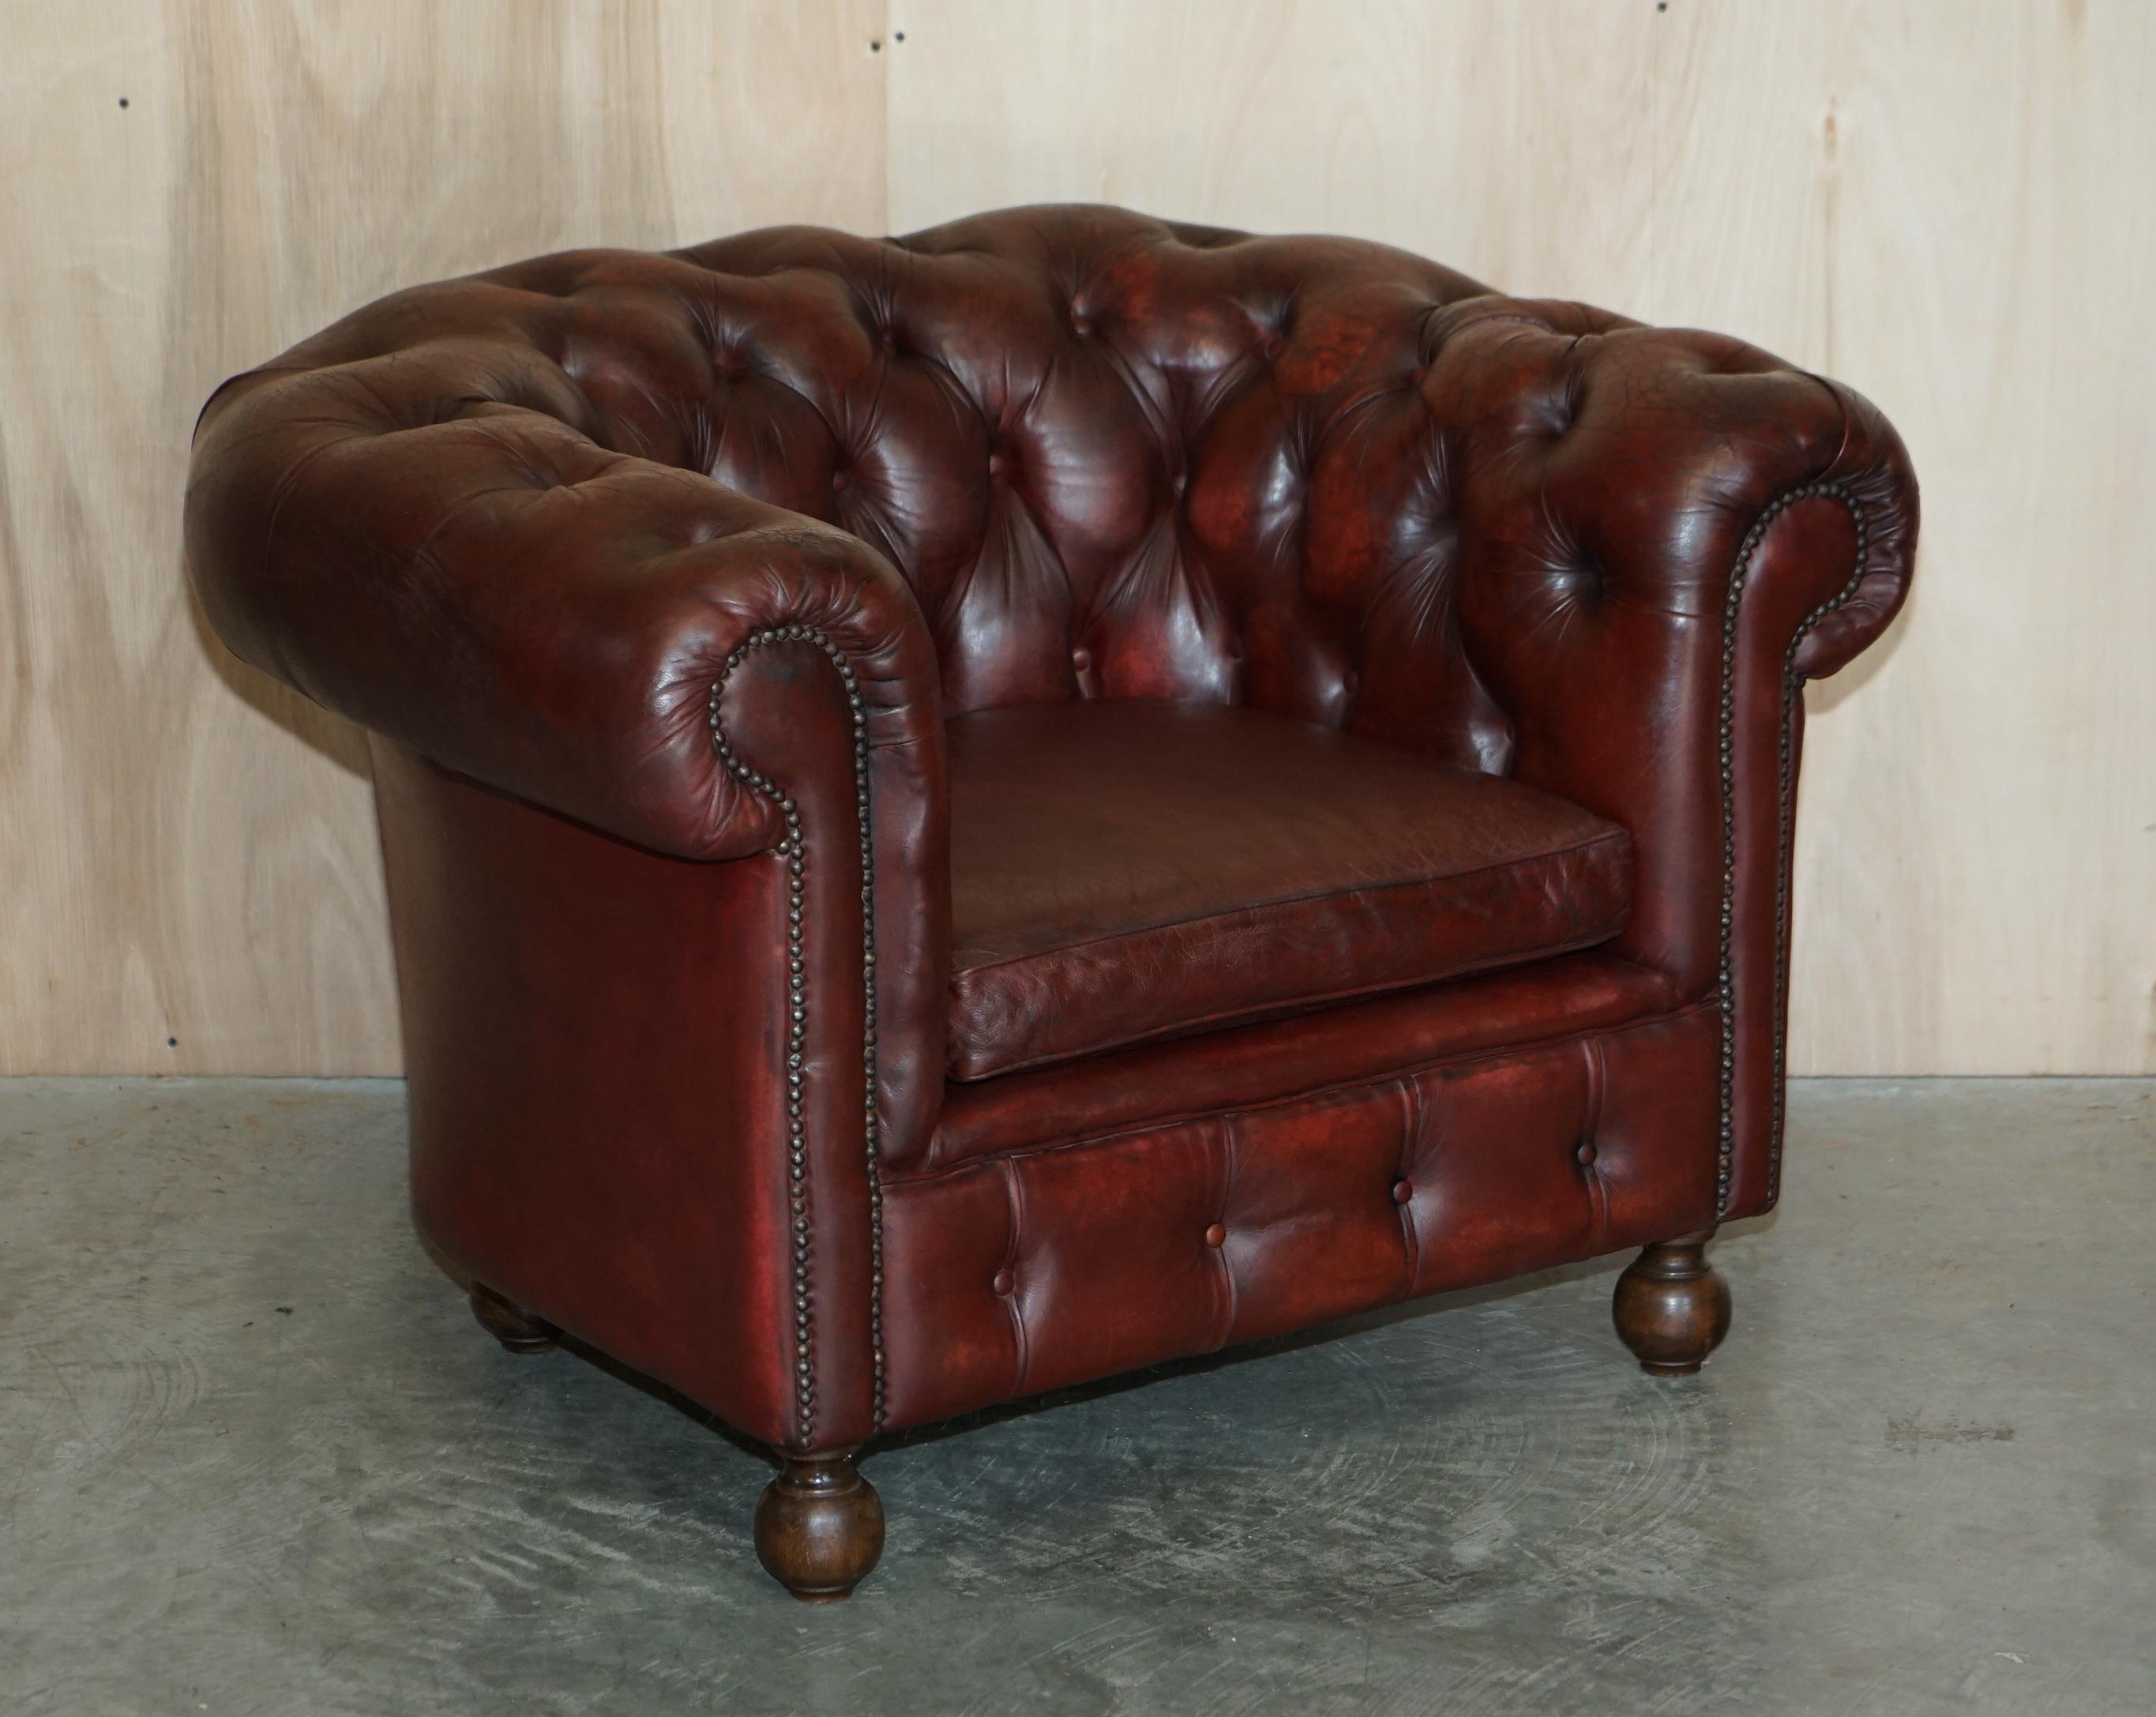 Royal House Antiques

Royal House Antiques is delighted to offer for sale this pair of stunning antique circa 1900 Oxblood leather Chesterfield Club armchairs

Please note the delivery fee listed is just a guide, it covers within the M25 only for